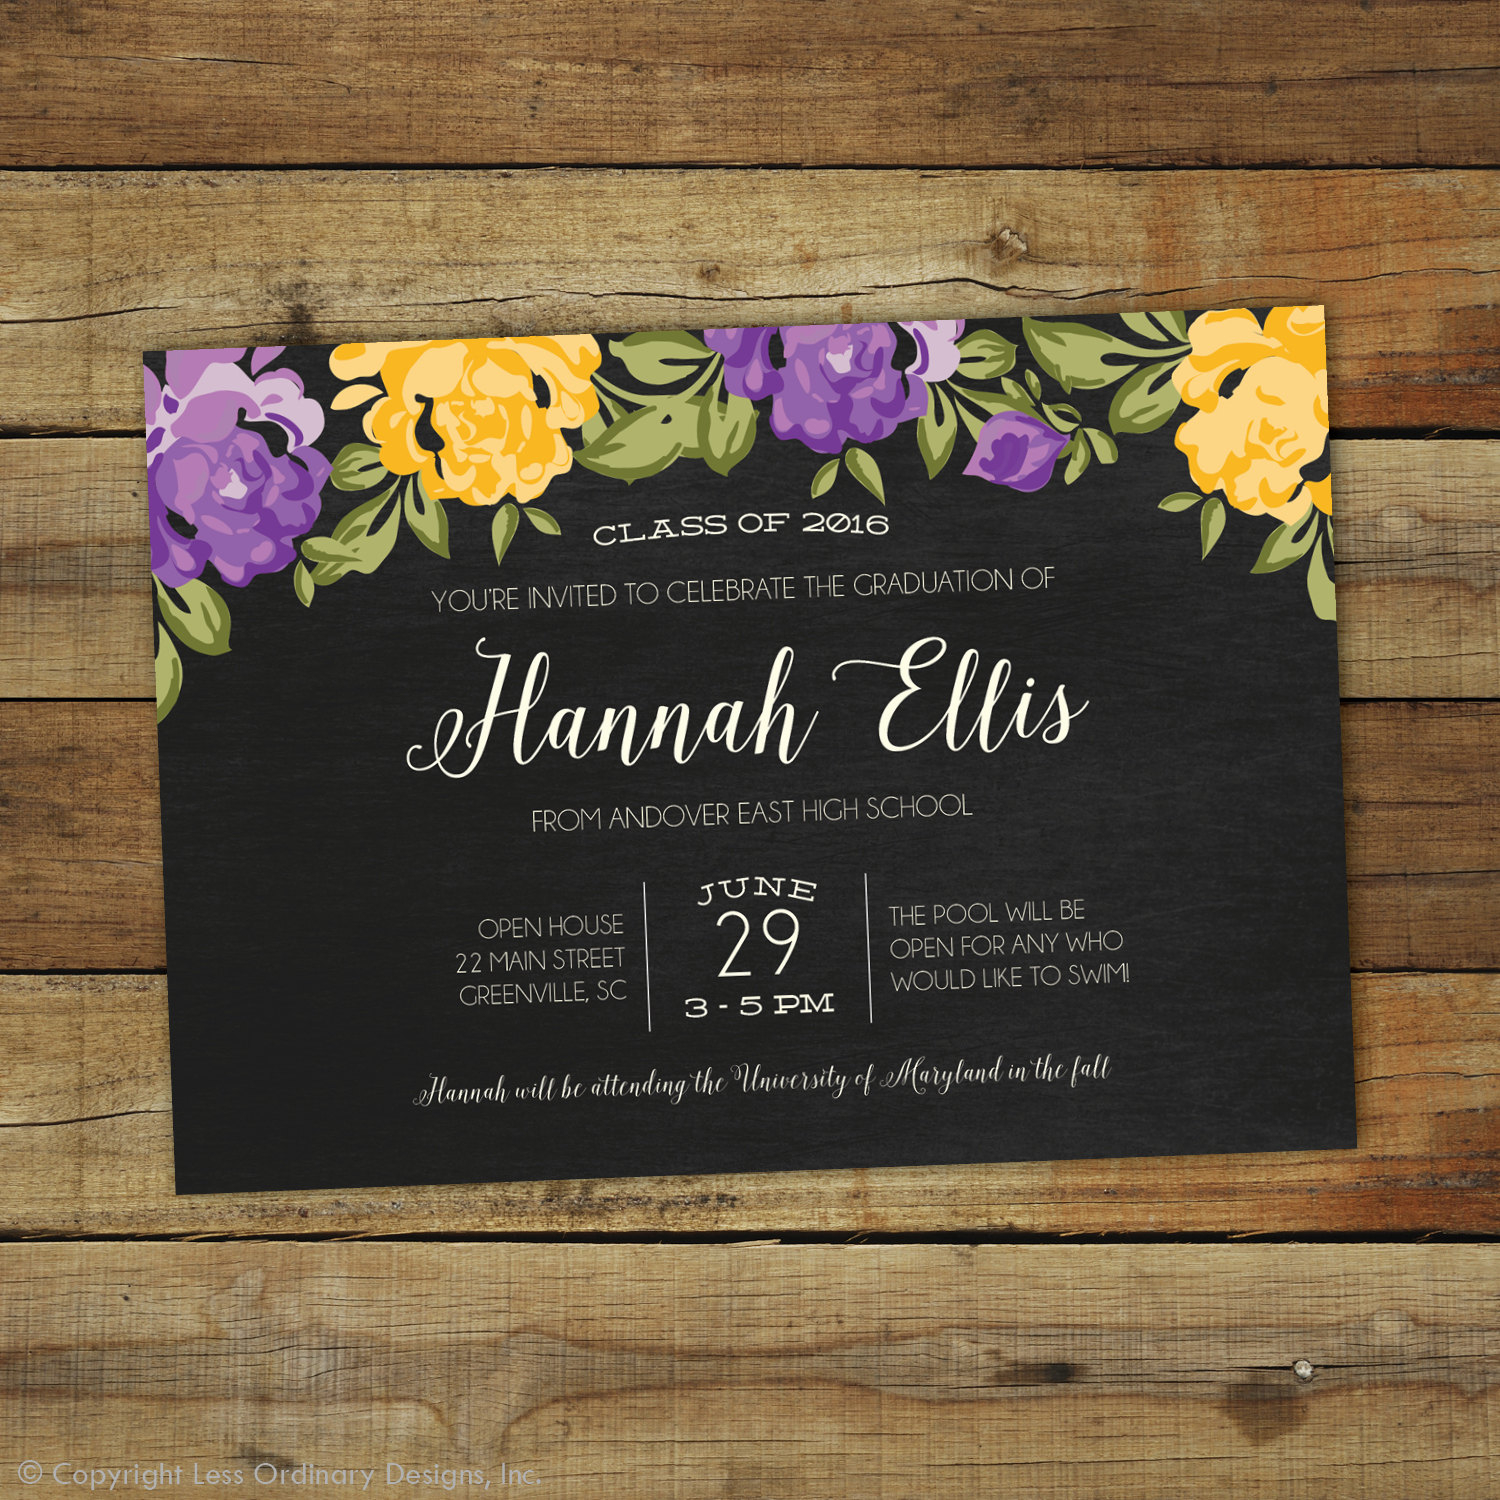 Graduation Invitations Open House For Free Graduation Invitation Templates For Word